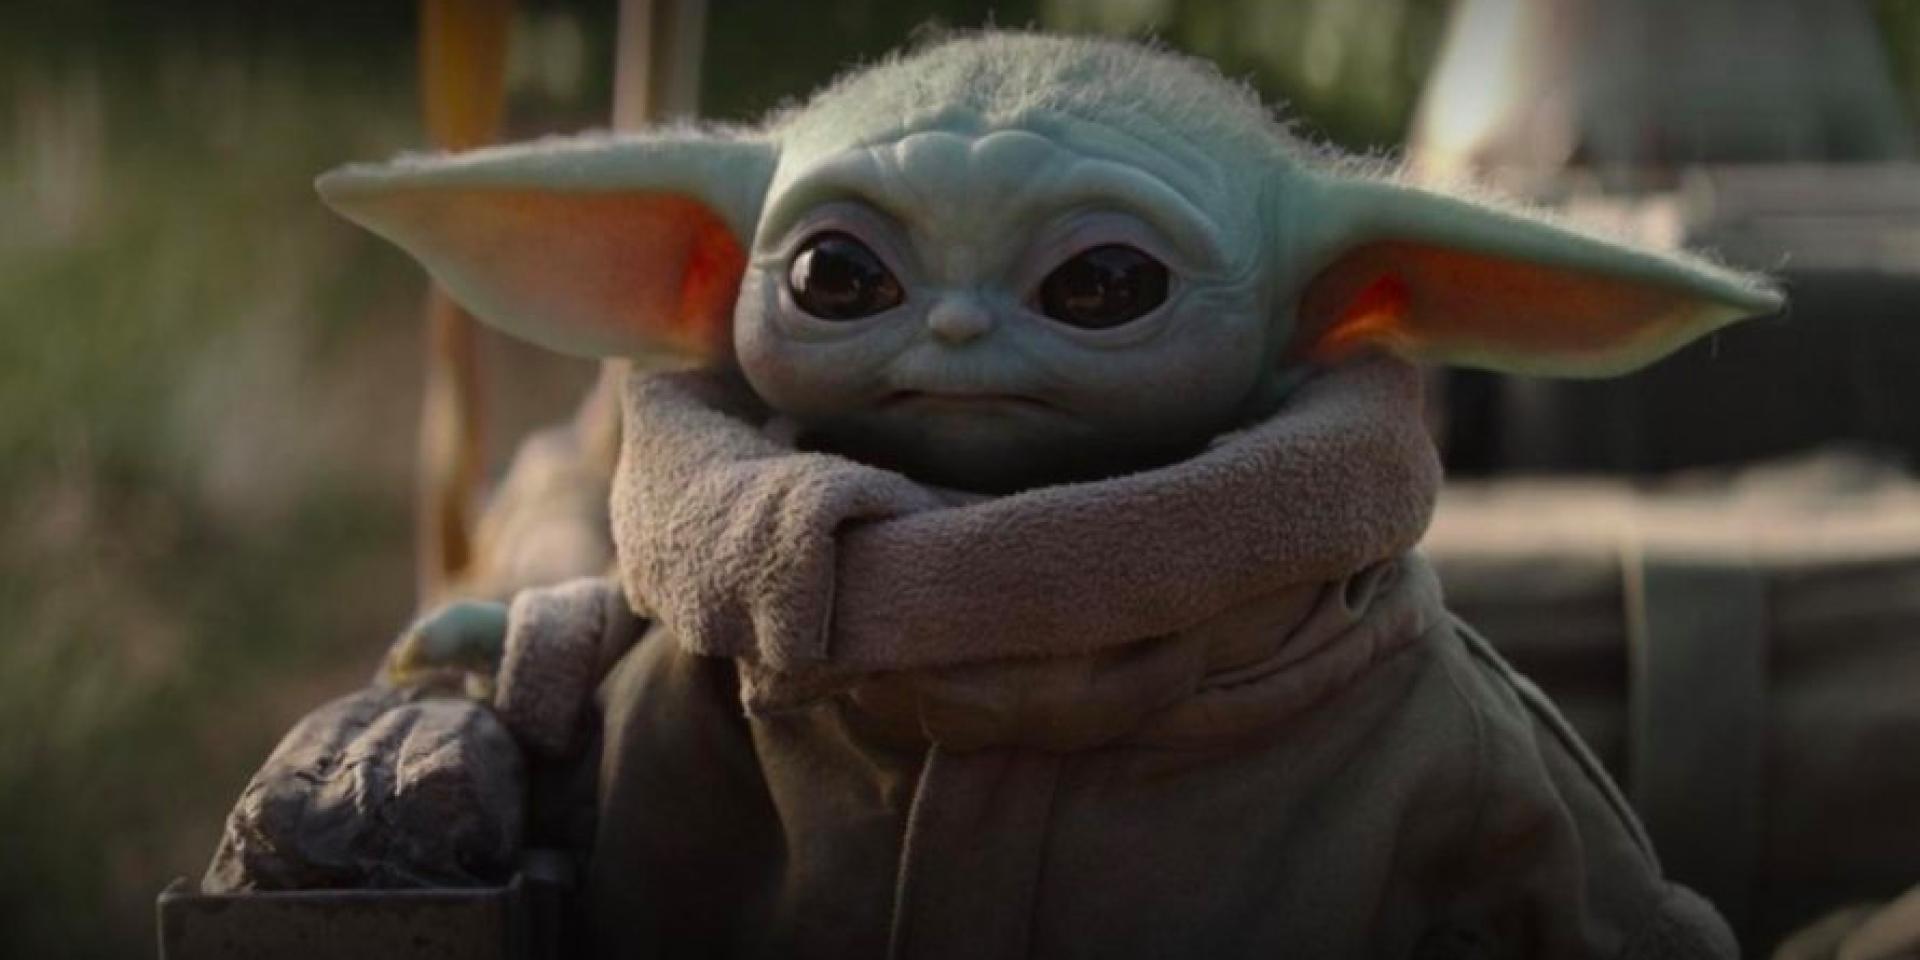 Who is baby yoda